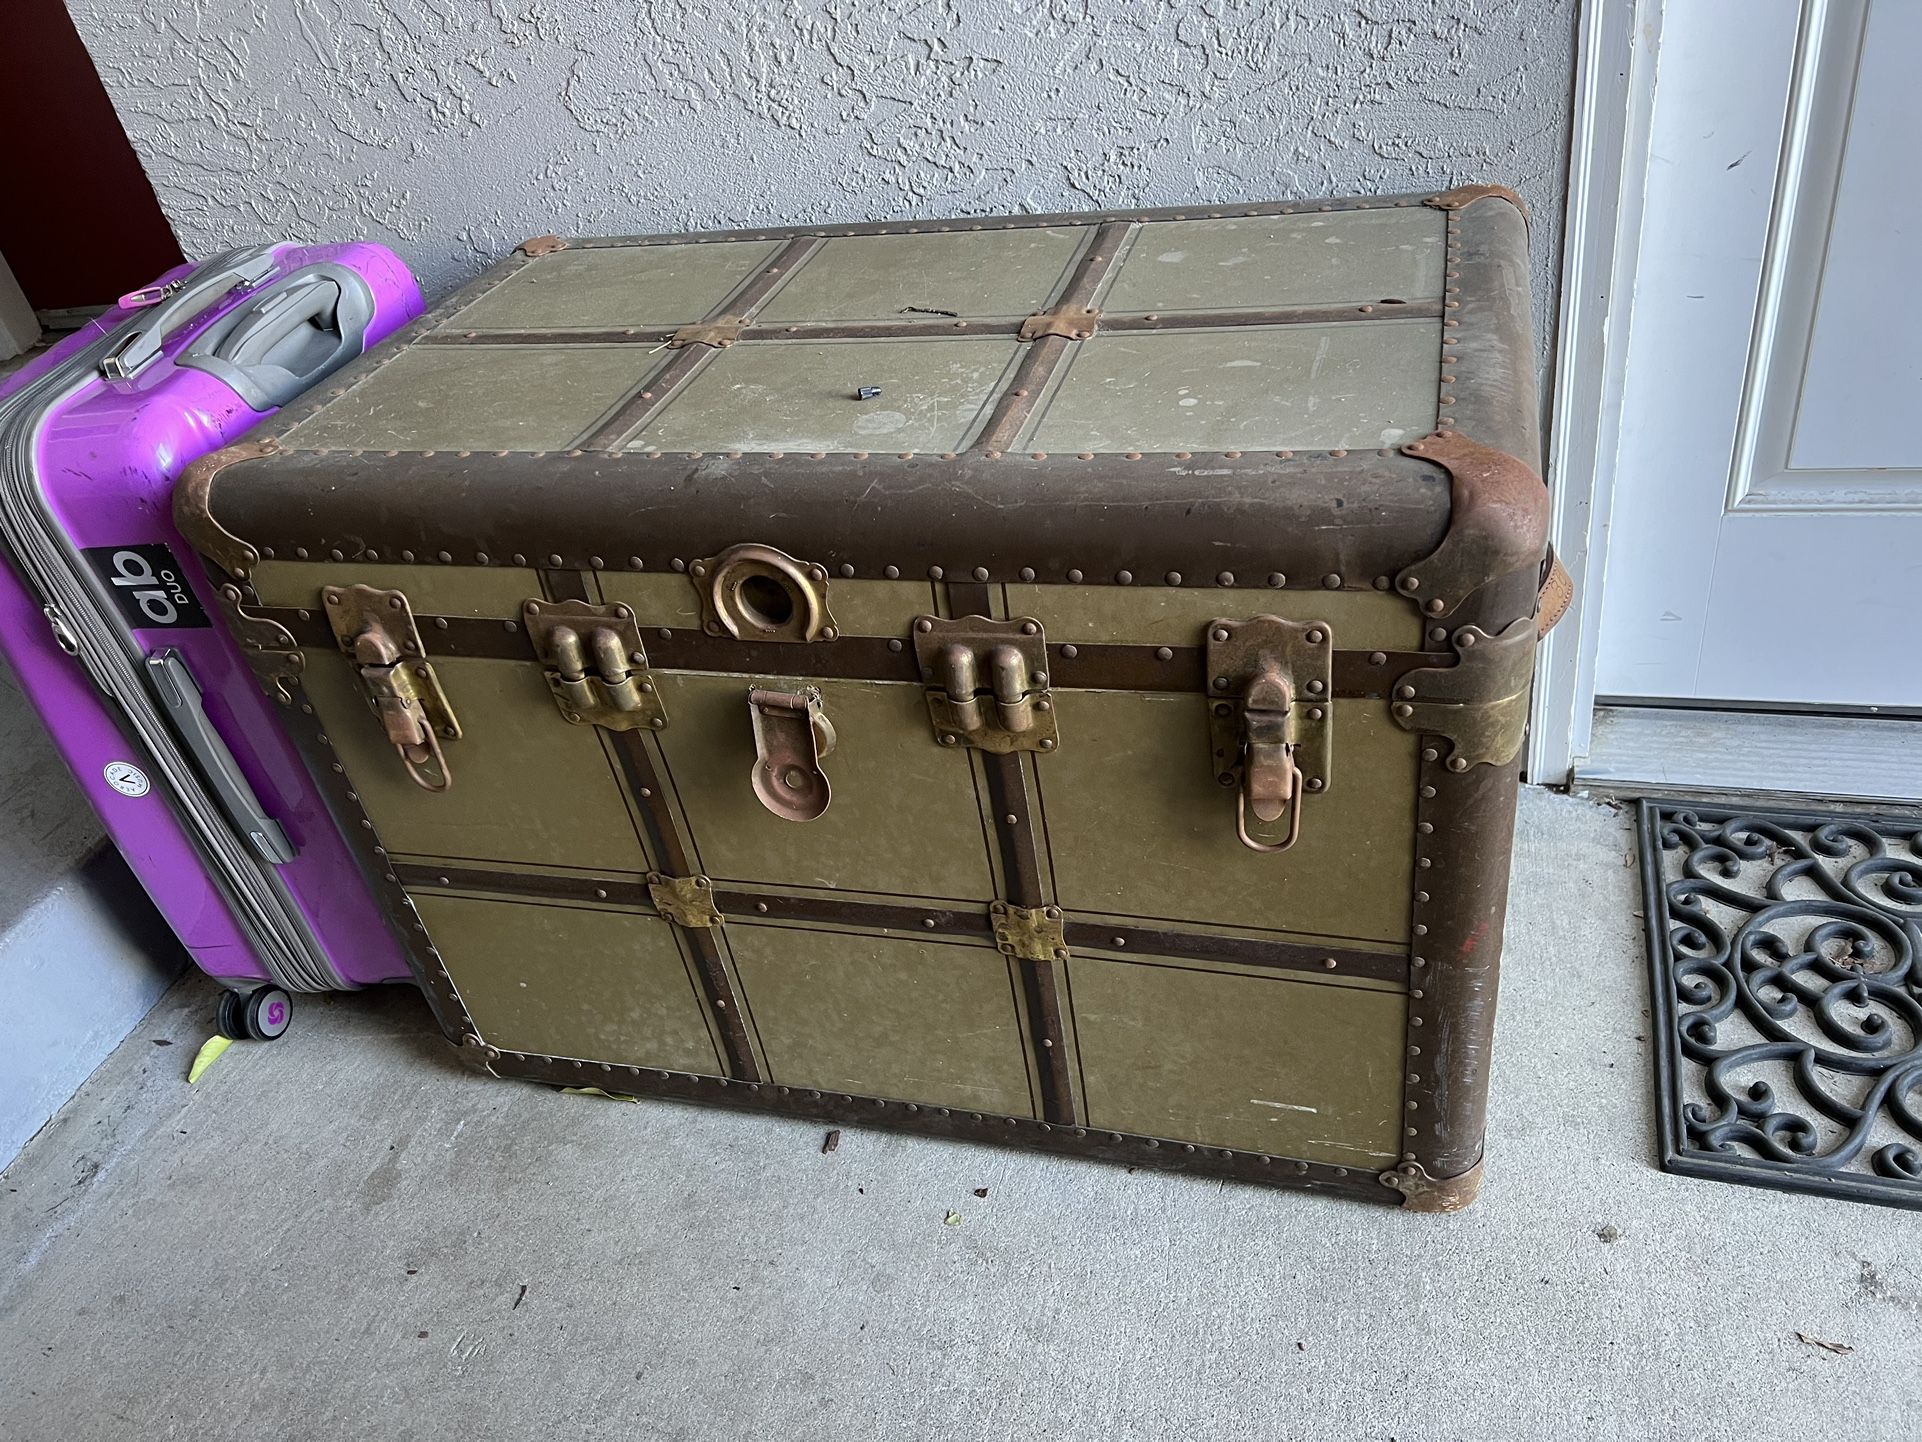 Vintage Steamer Trunk for Sale in Campbell, CA - OfferUp